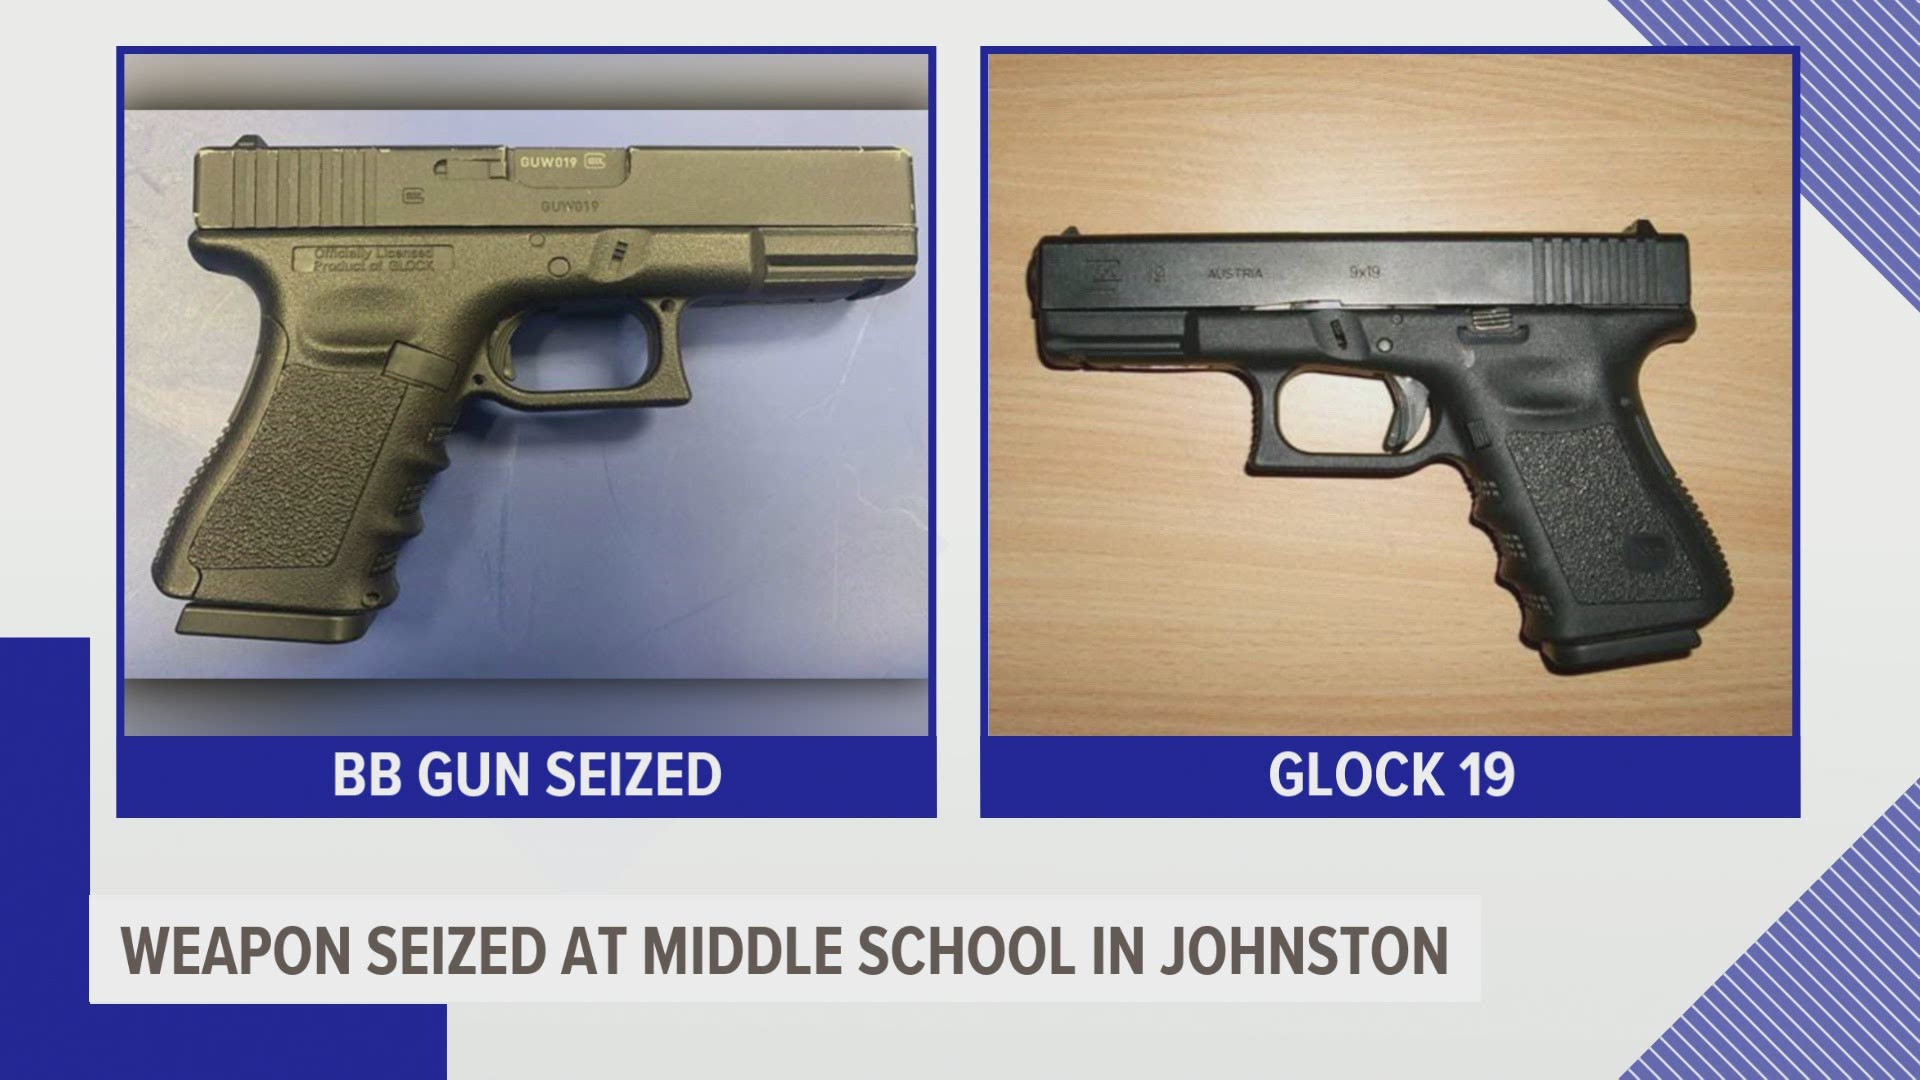 The BB gun brought to Summit Middle School Tuesday closely resembles a Glock 19 semi-automatic handgun.